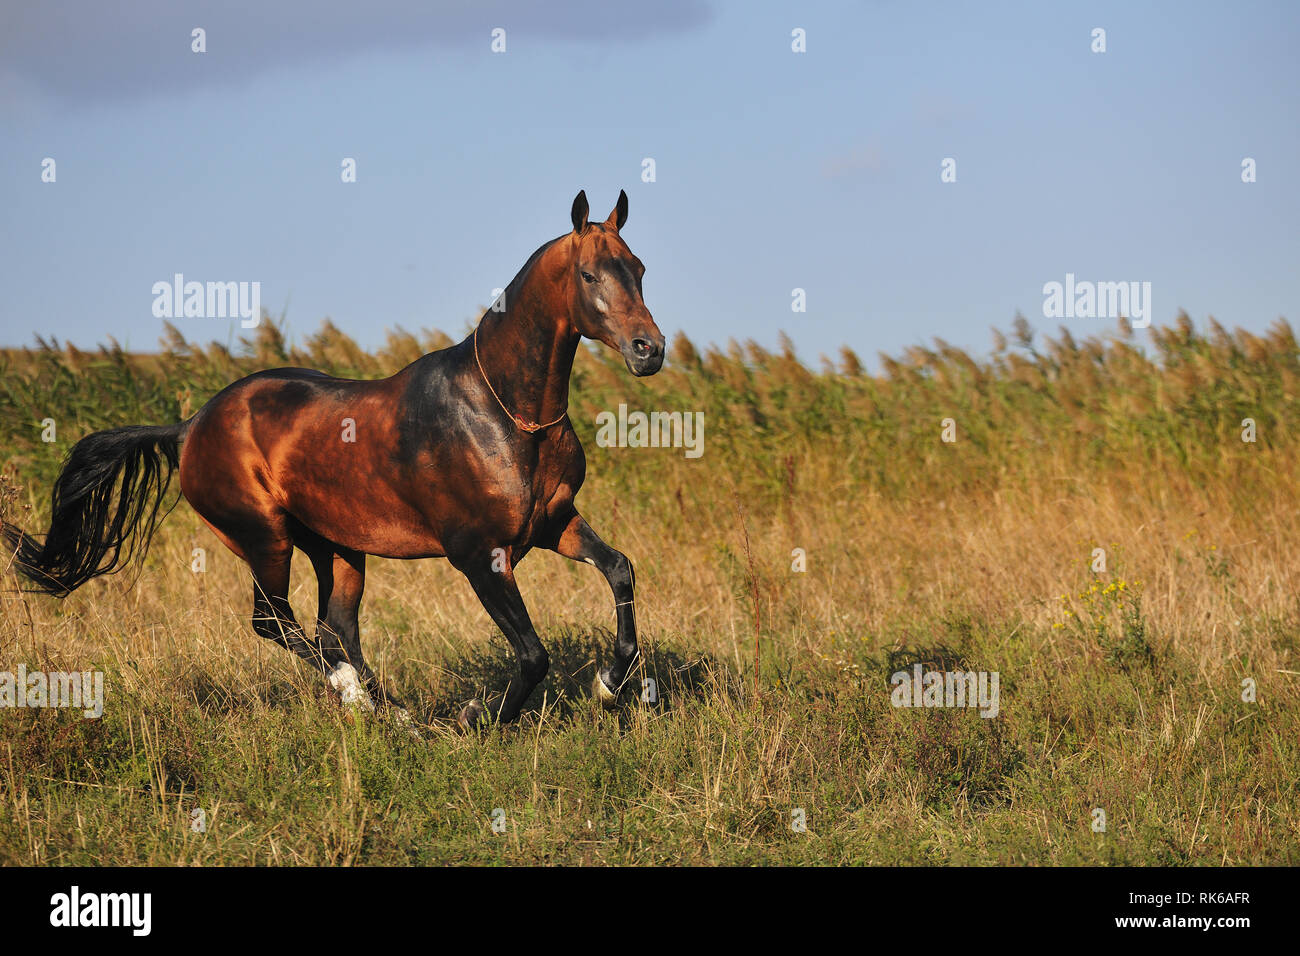 Bay powerful Akhal-Teke galloping through the field in summer. Vertical, side view. Stock Photo